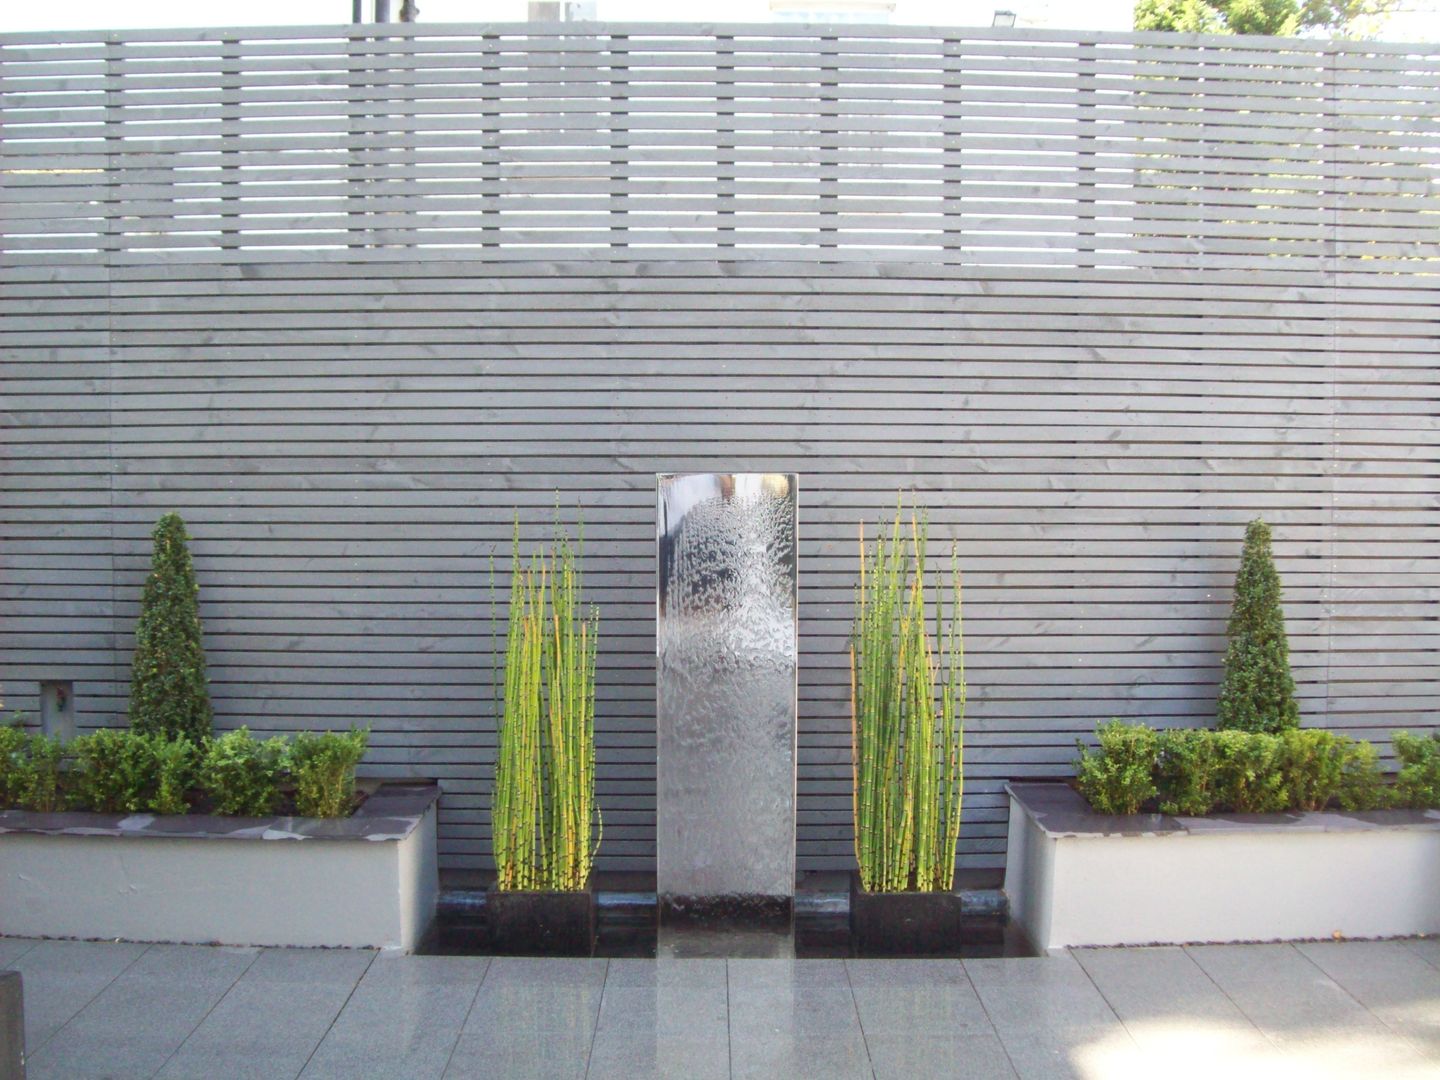 Stainless Steel Metal Water Feature Unique Landscapes حديقة